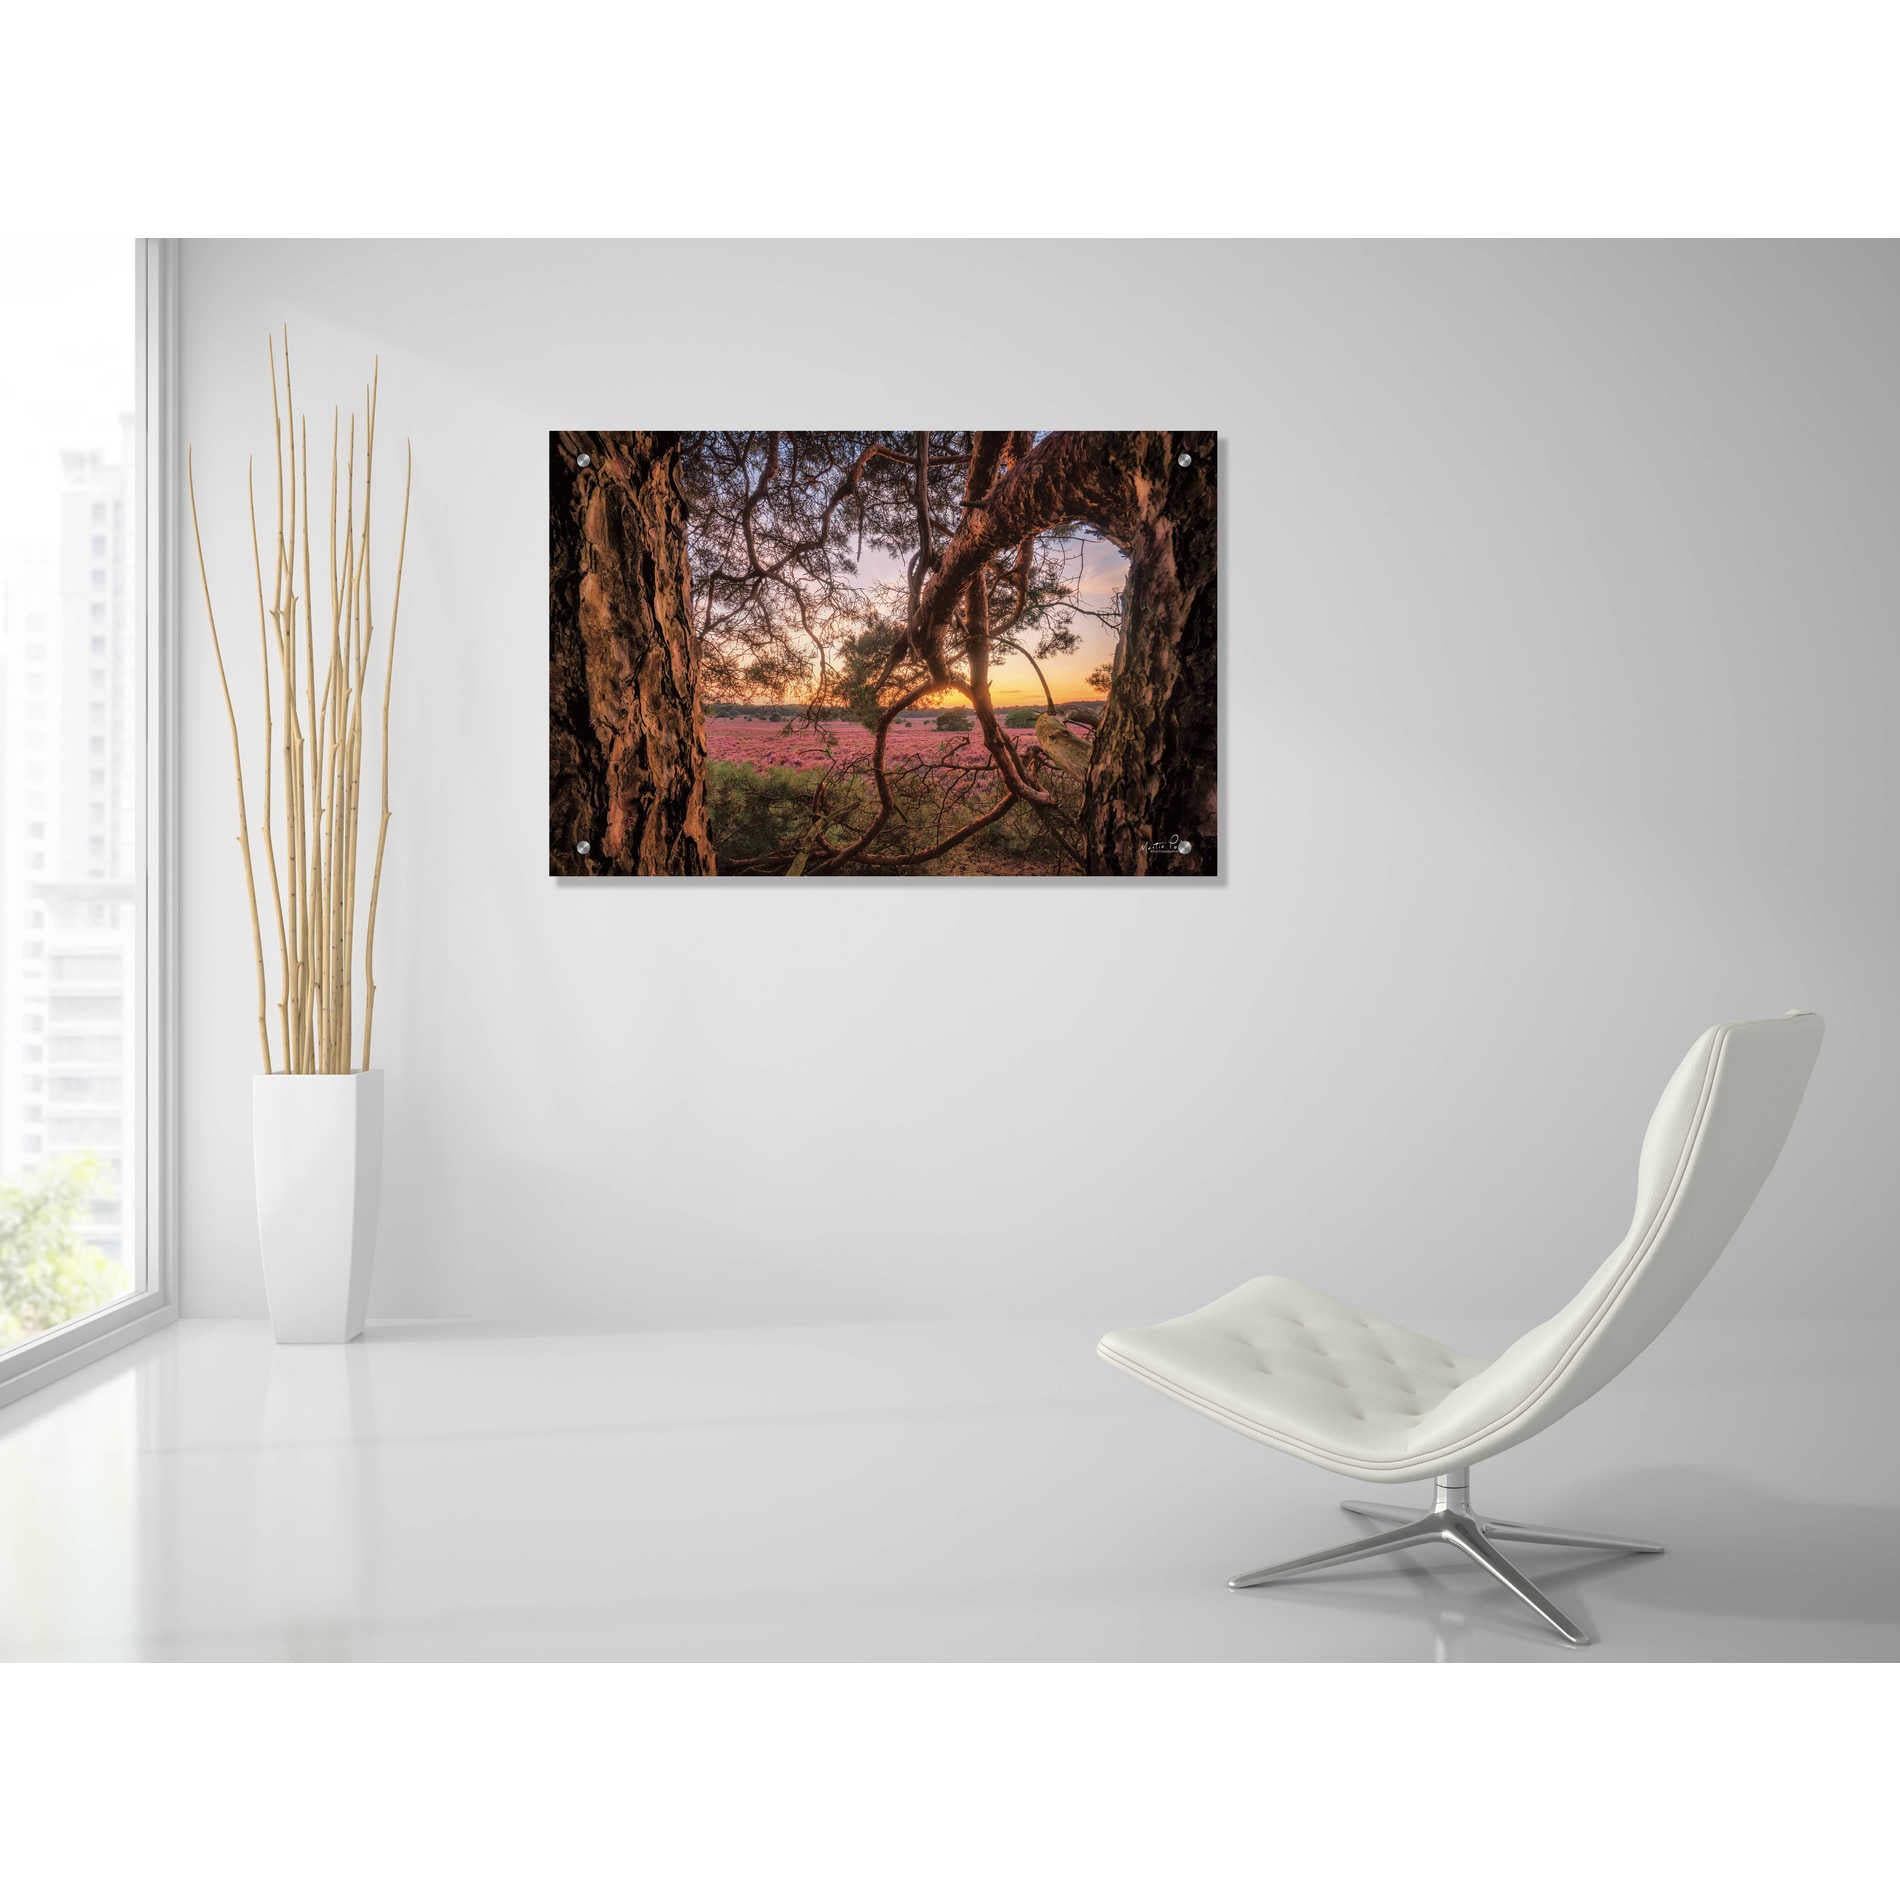 Epic Art 'In Between' by Martin Podt, Acrylic Glass Wall Art,36x24